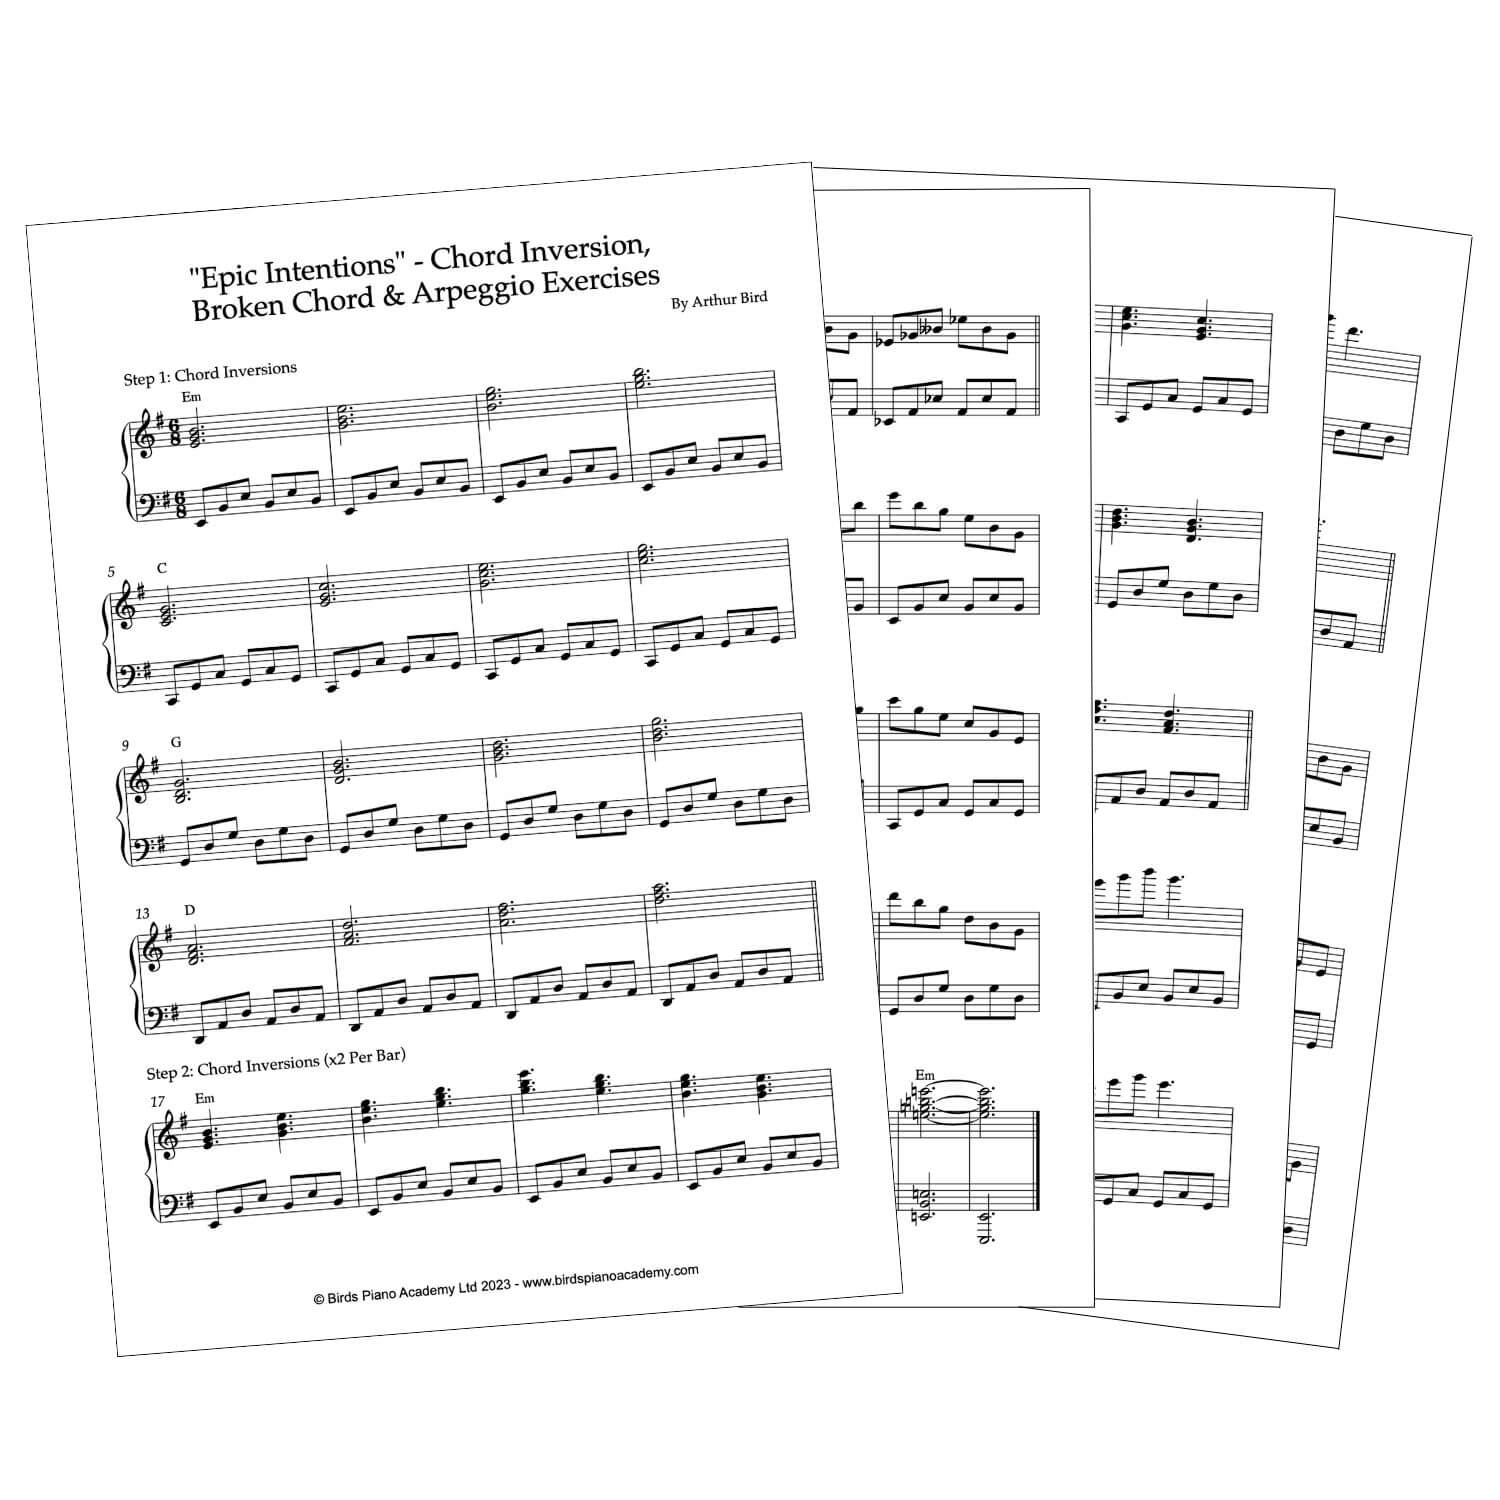 "Epic Intentions" - Chord Inversion, Broken Chord and Arpeggio Exercises Sheet Music (PDF Download)